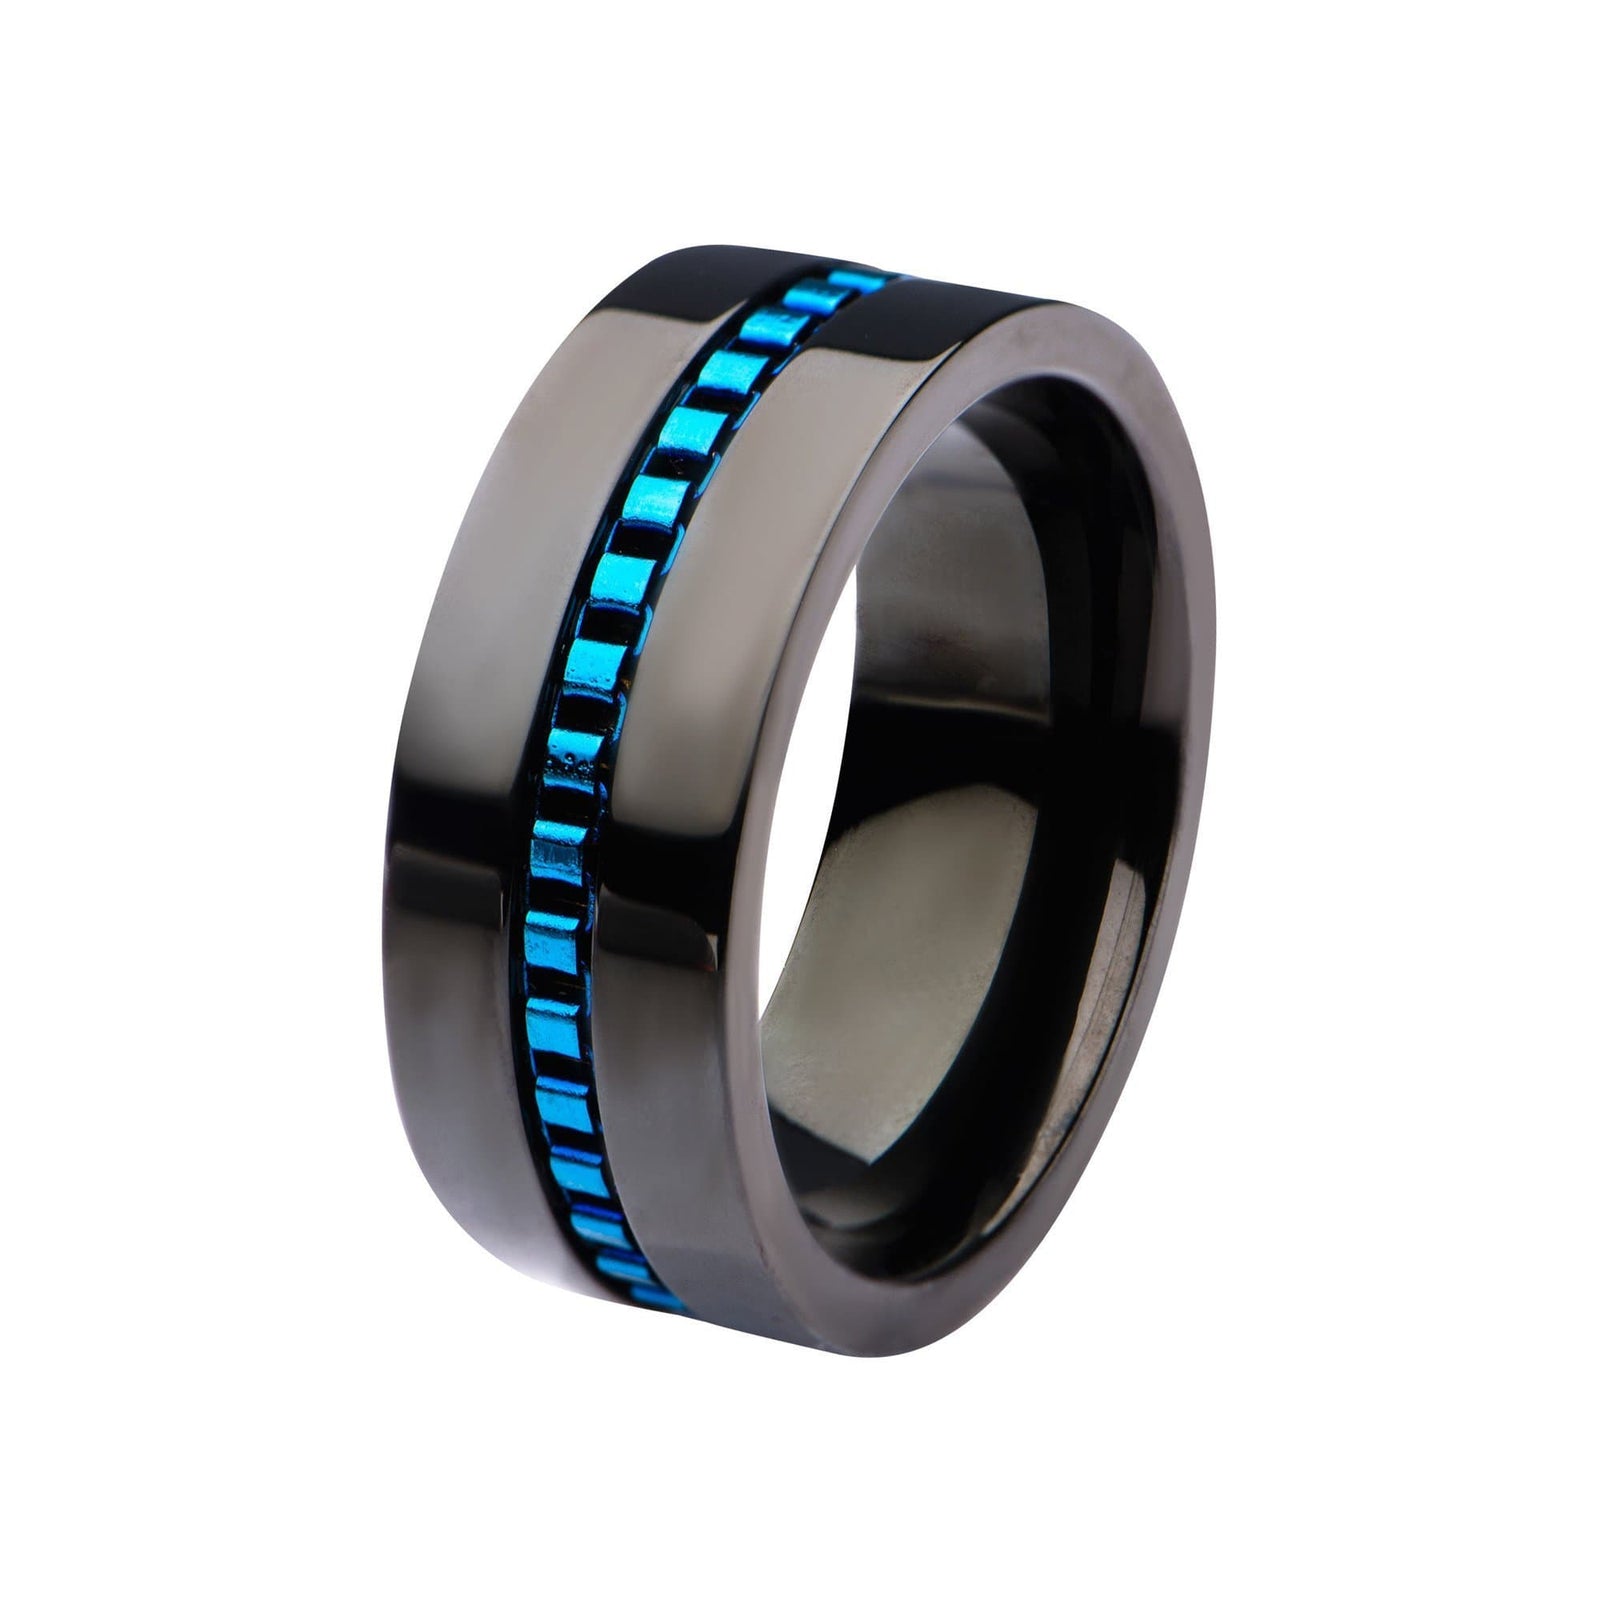 INOX JEWELRY Rings Blue and Black Stainless Steel Interconnected Linked Detail Modern Band Ring